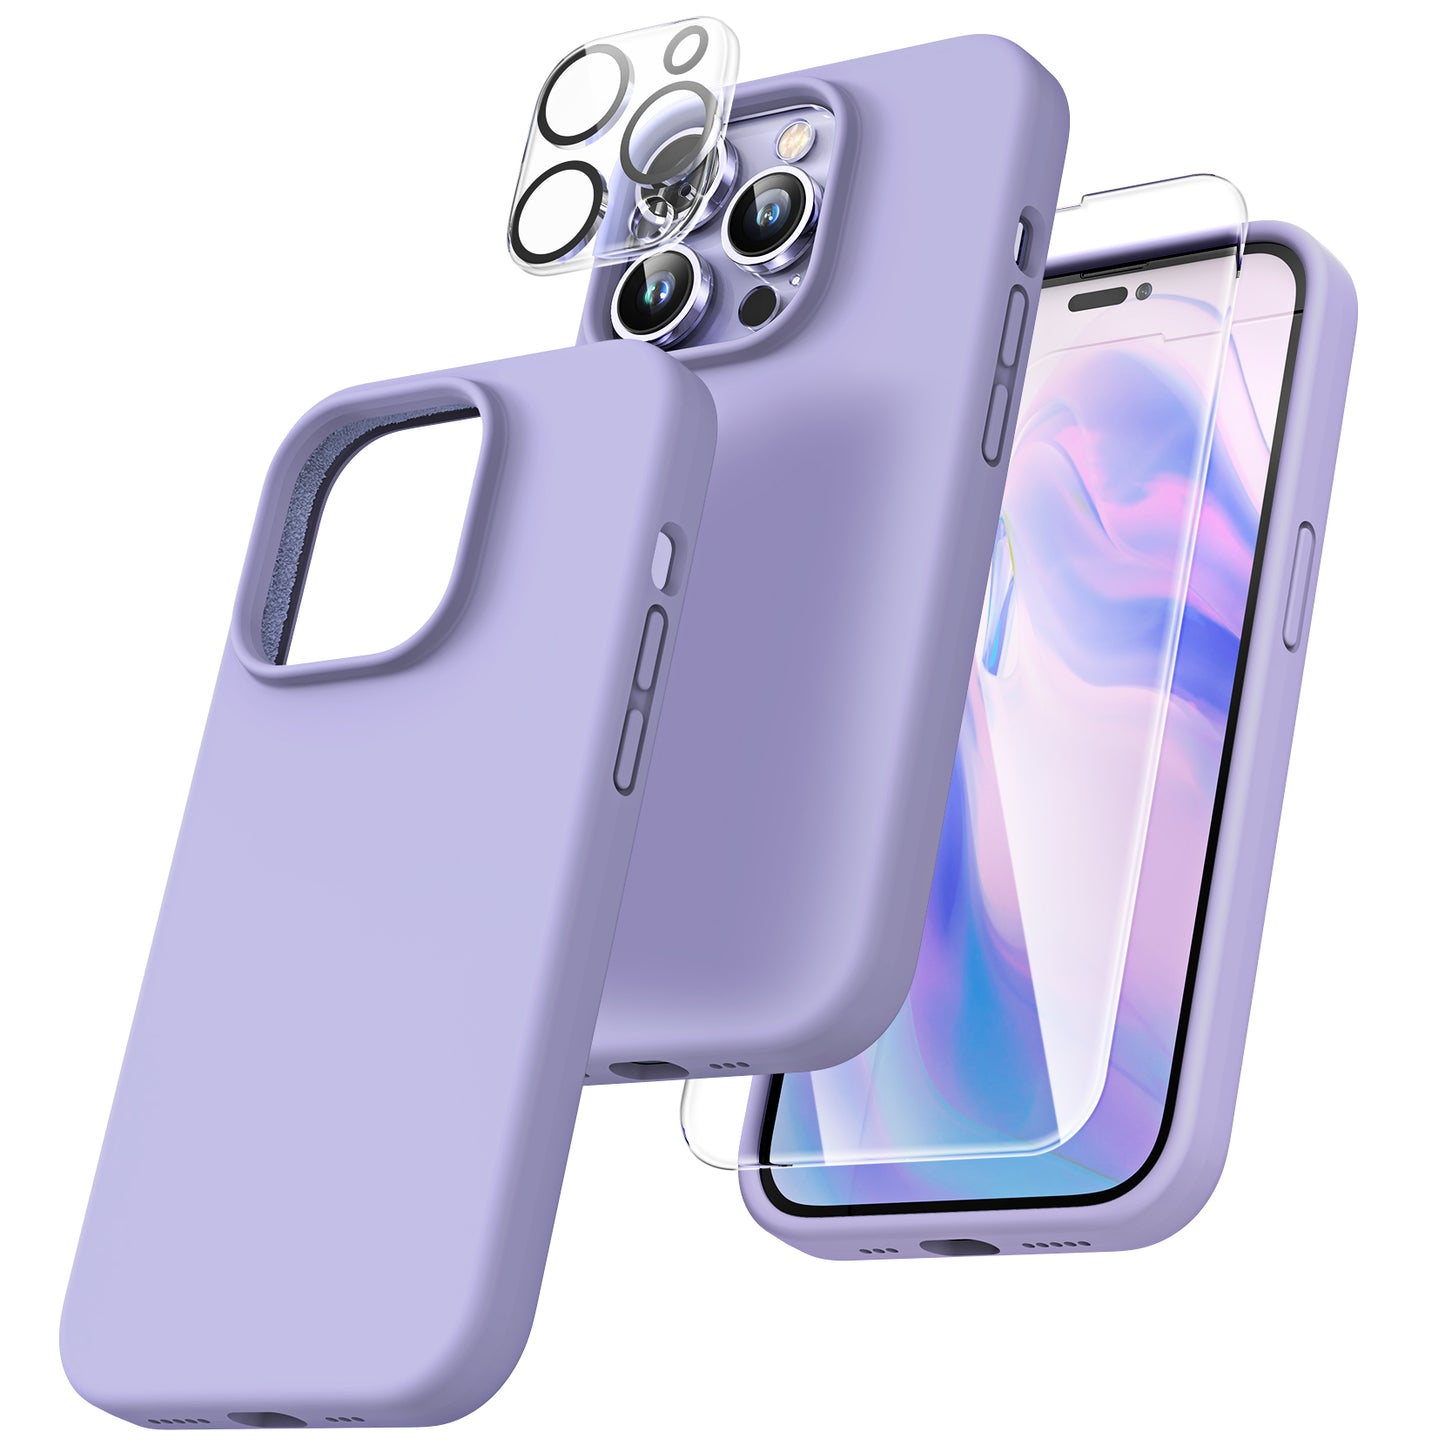 TOCOL [5 in 1] for iPhone 14 Pro Case, 2 Pack Screen Protector + 2 Pack Camera Lens Protector, Slim Liquid Silicone Phone Case iPhone 14 Pro 6.1 Inch, [Anti-Scratch] [Drop Protection], Lilac Purple